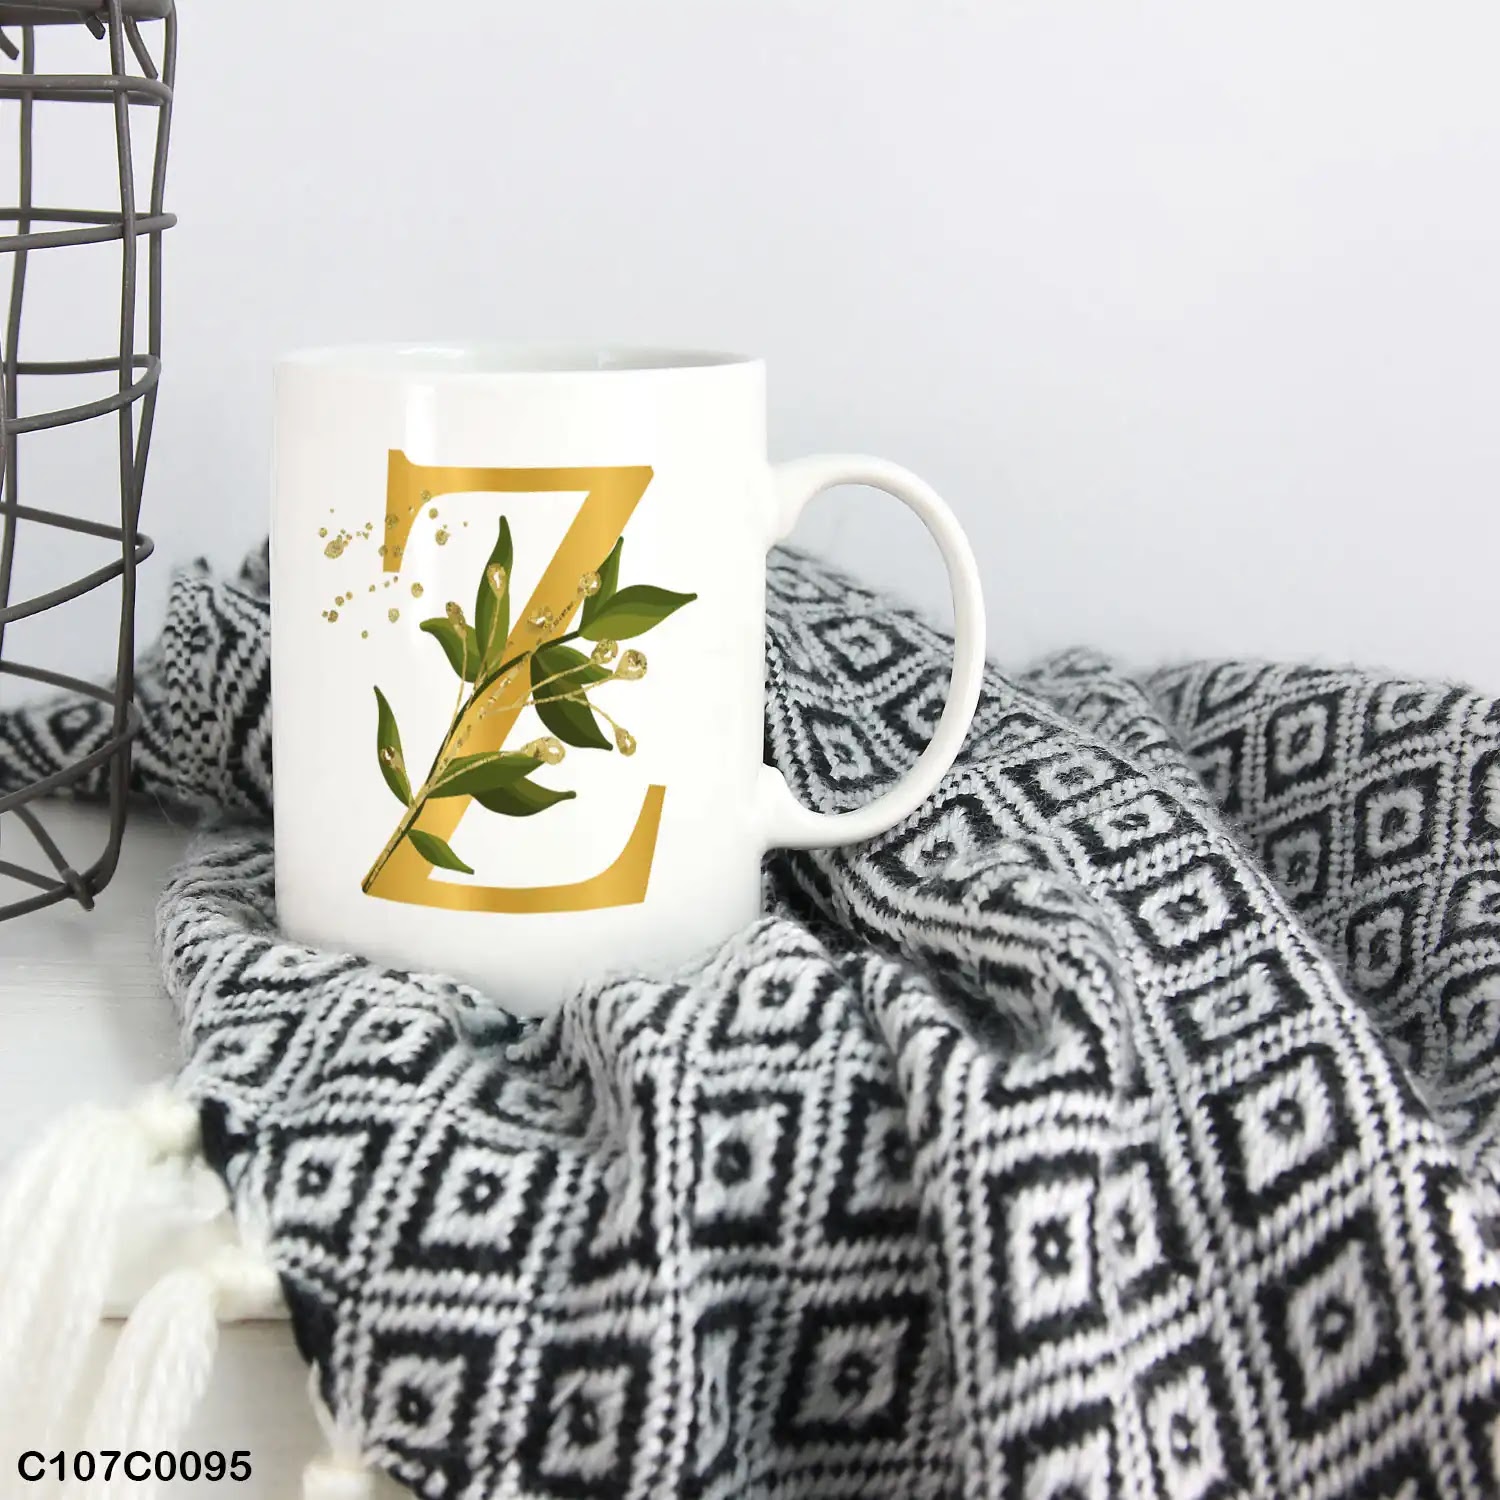 A white mug (cup) printed with gold Letter "Z"and small green branch